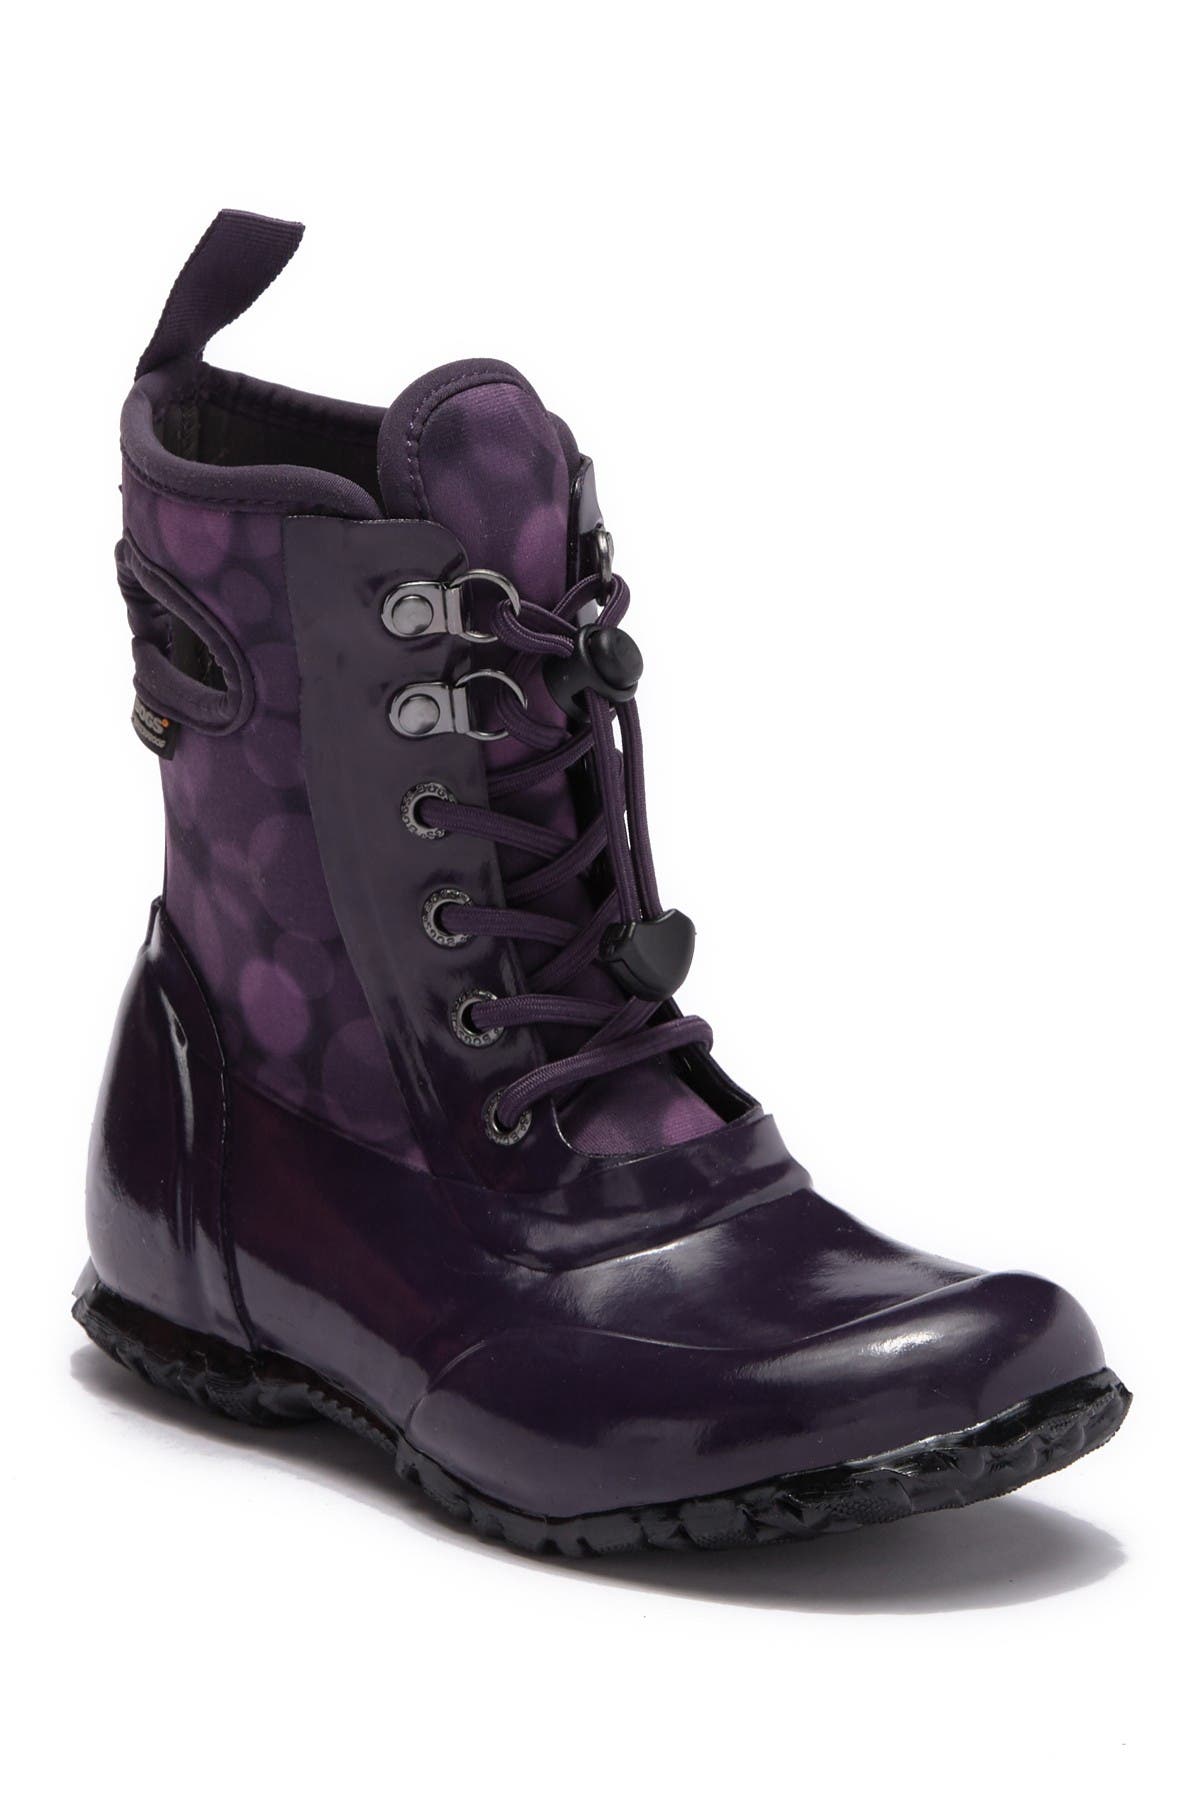 Bogs | Sidney Lace-Up Rain Boot 